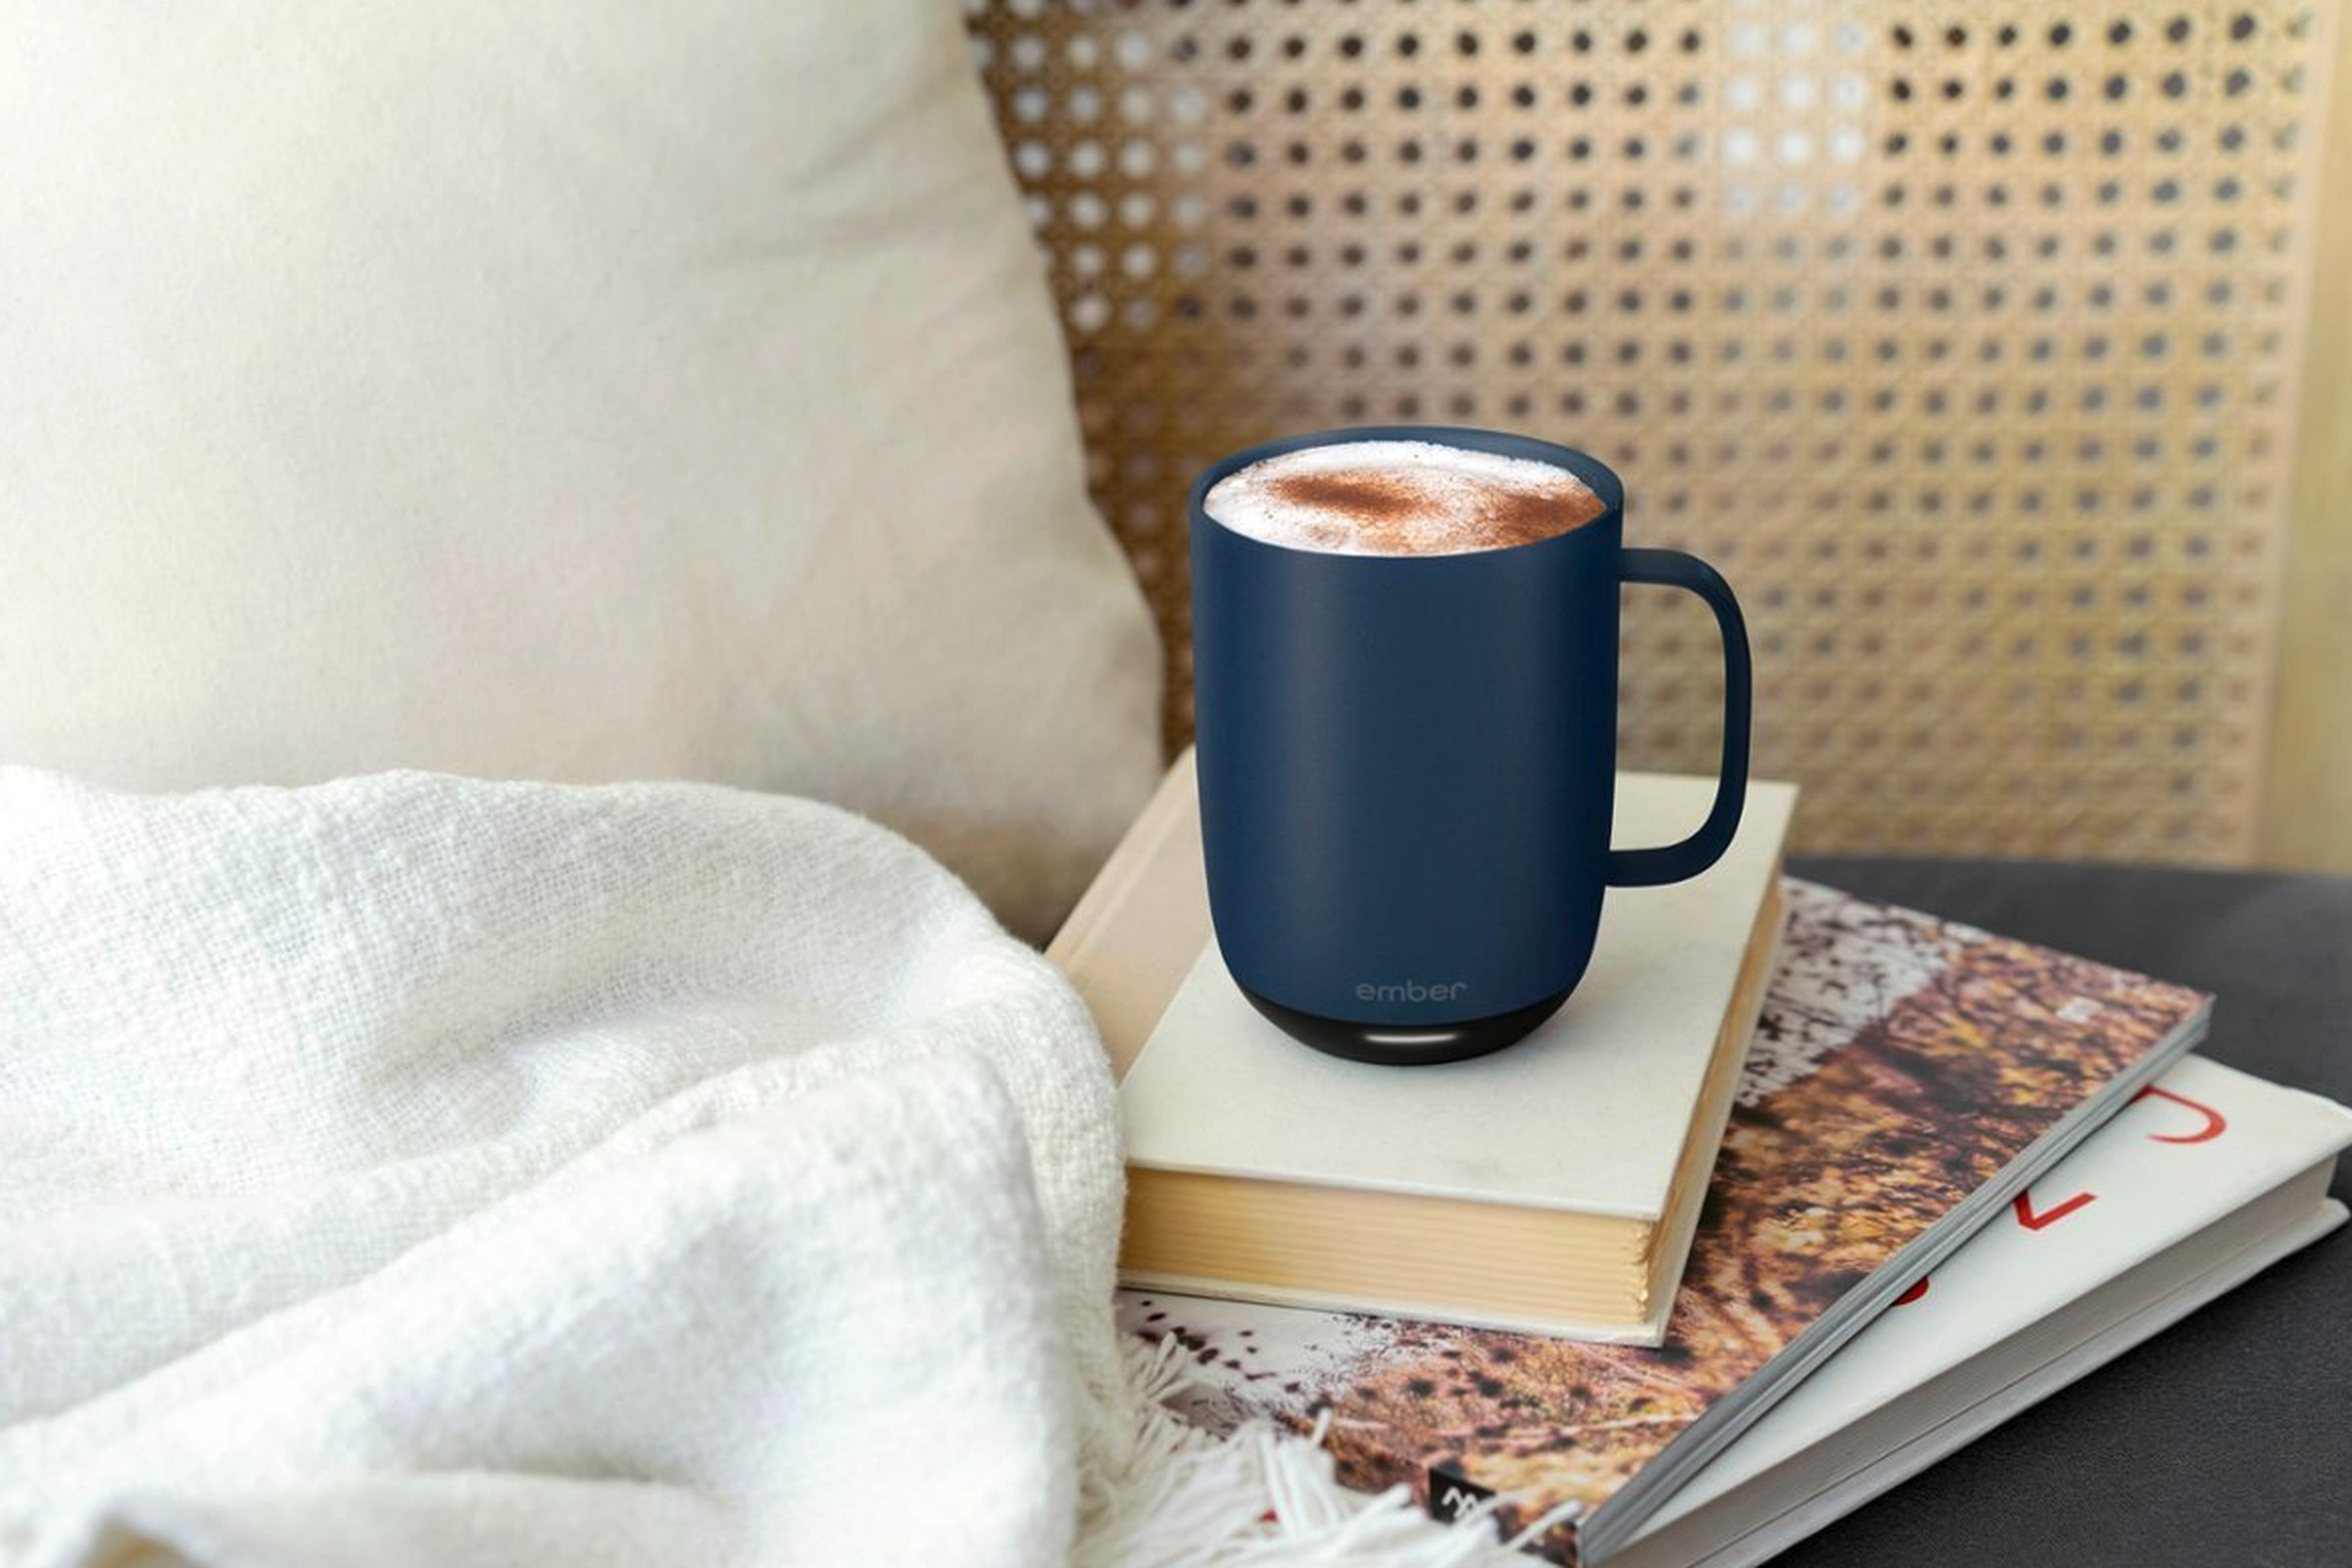 You can set your coffee to the exact temperature you like via the Ember Mug 2’s accompanying smartphone app.